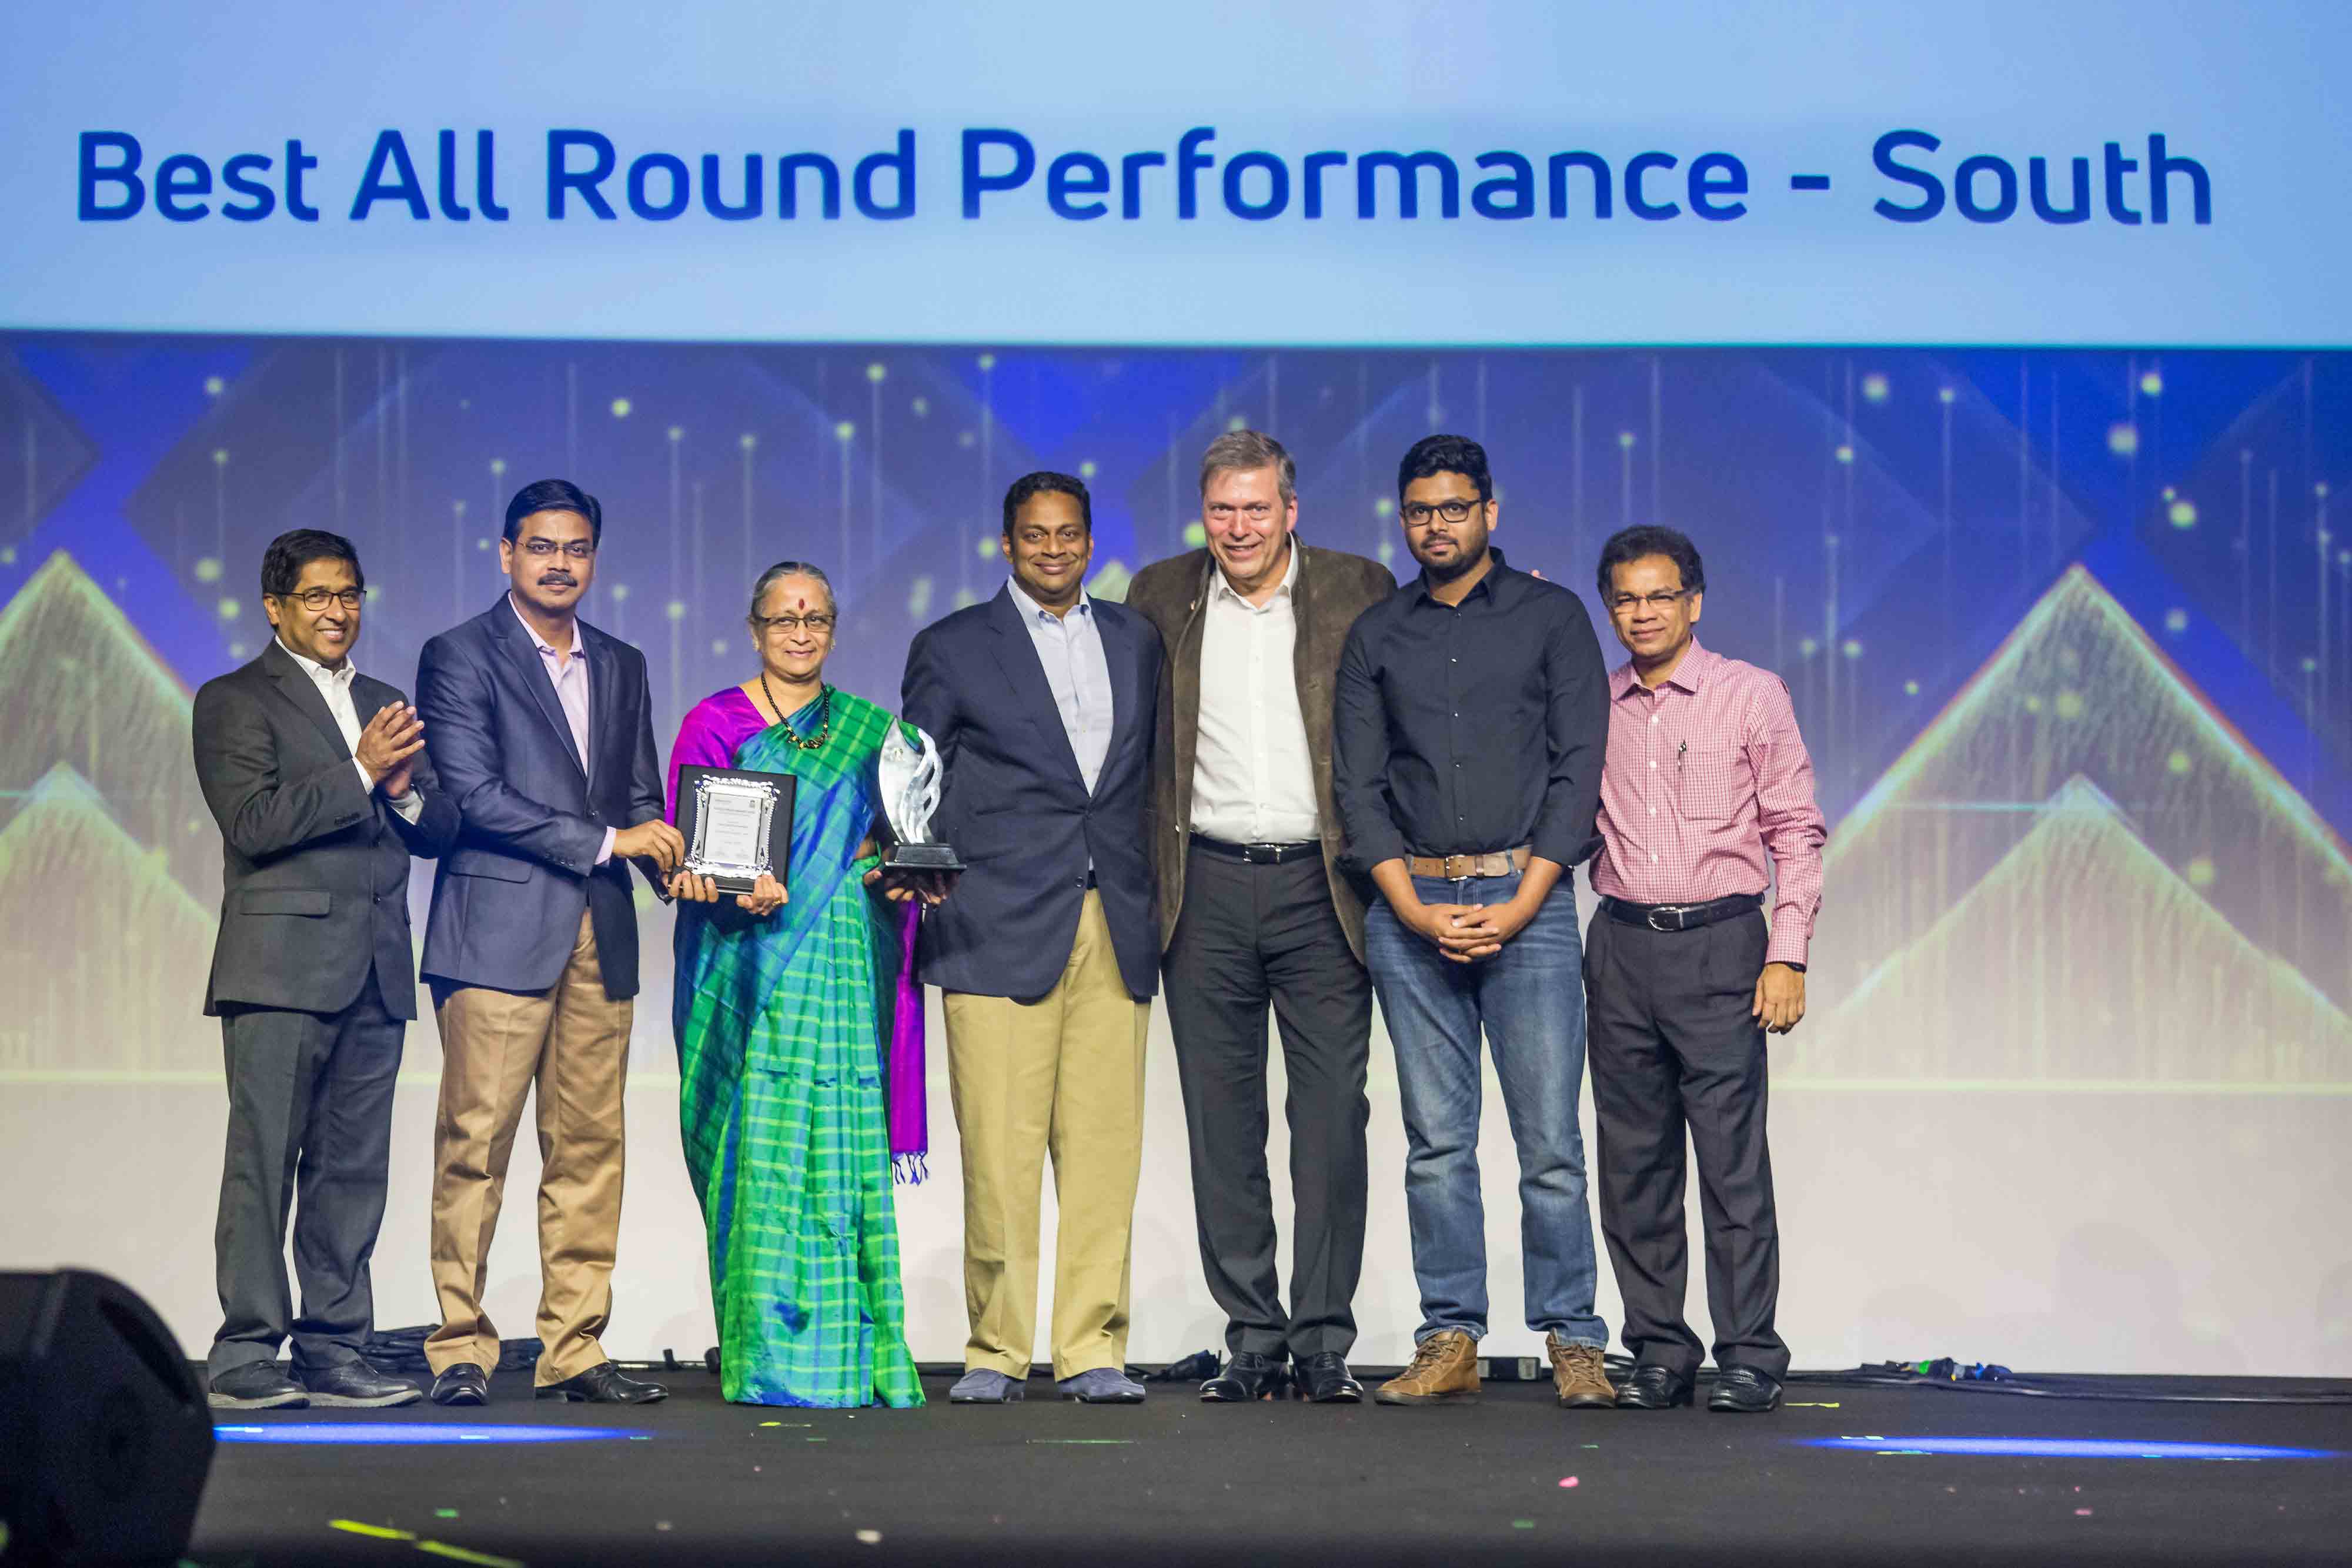 Best All Round Performance - South